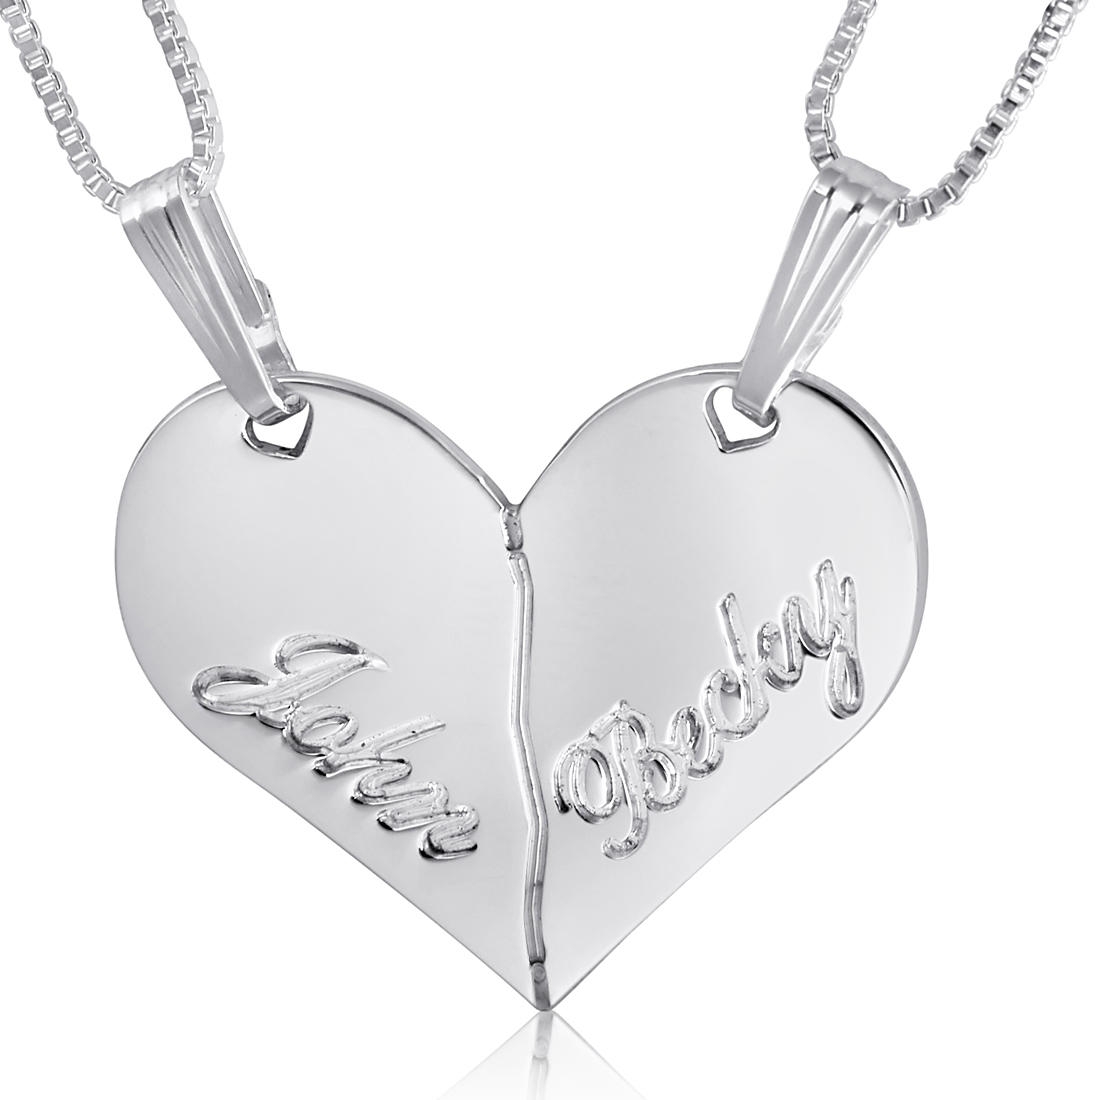 Buy Personalized Broken Heart Necklace, Silver Broken Heart Necklace,  Engraved Split Heart Necklace, His & Hers Necklace, Valentine's Day Gift  Online in India - Etsy